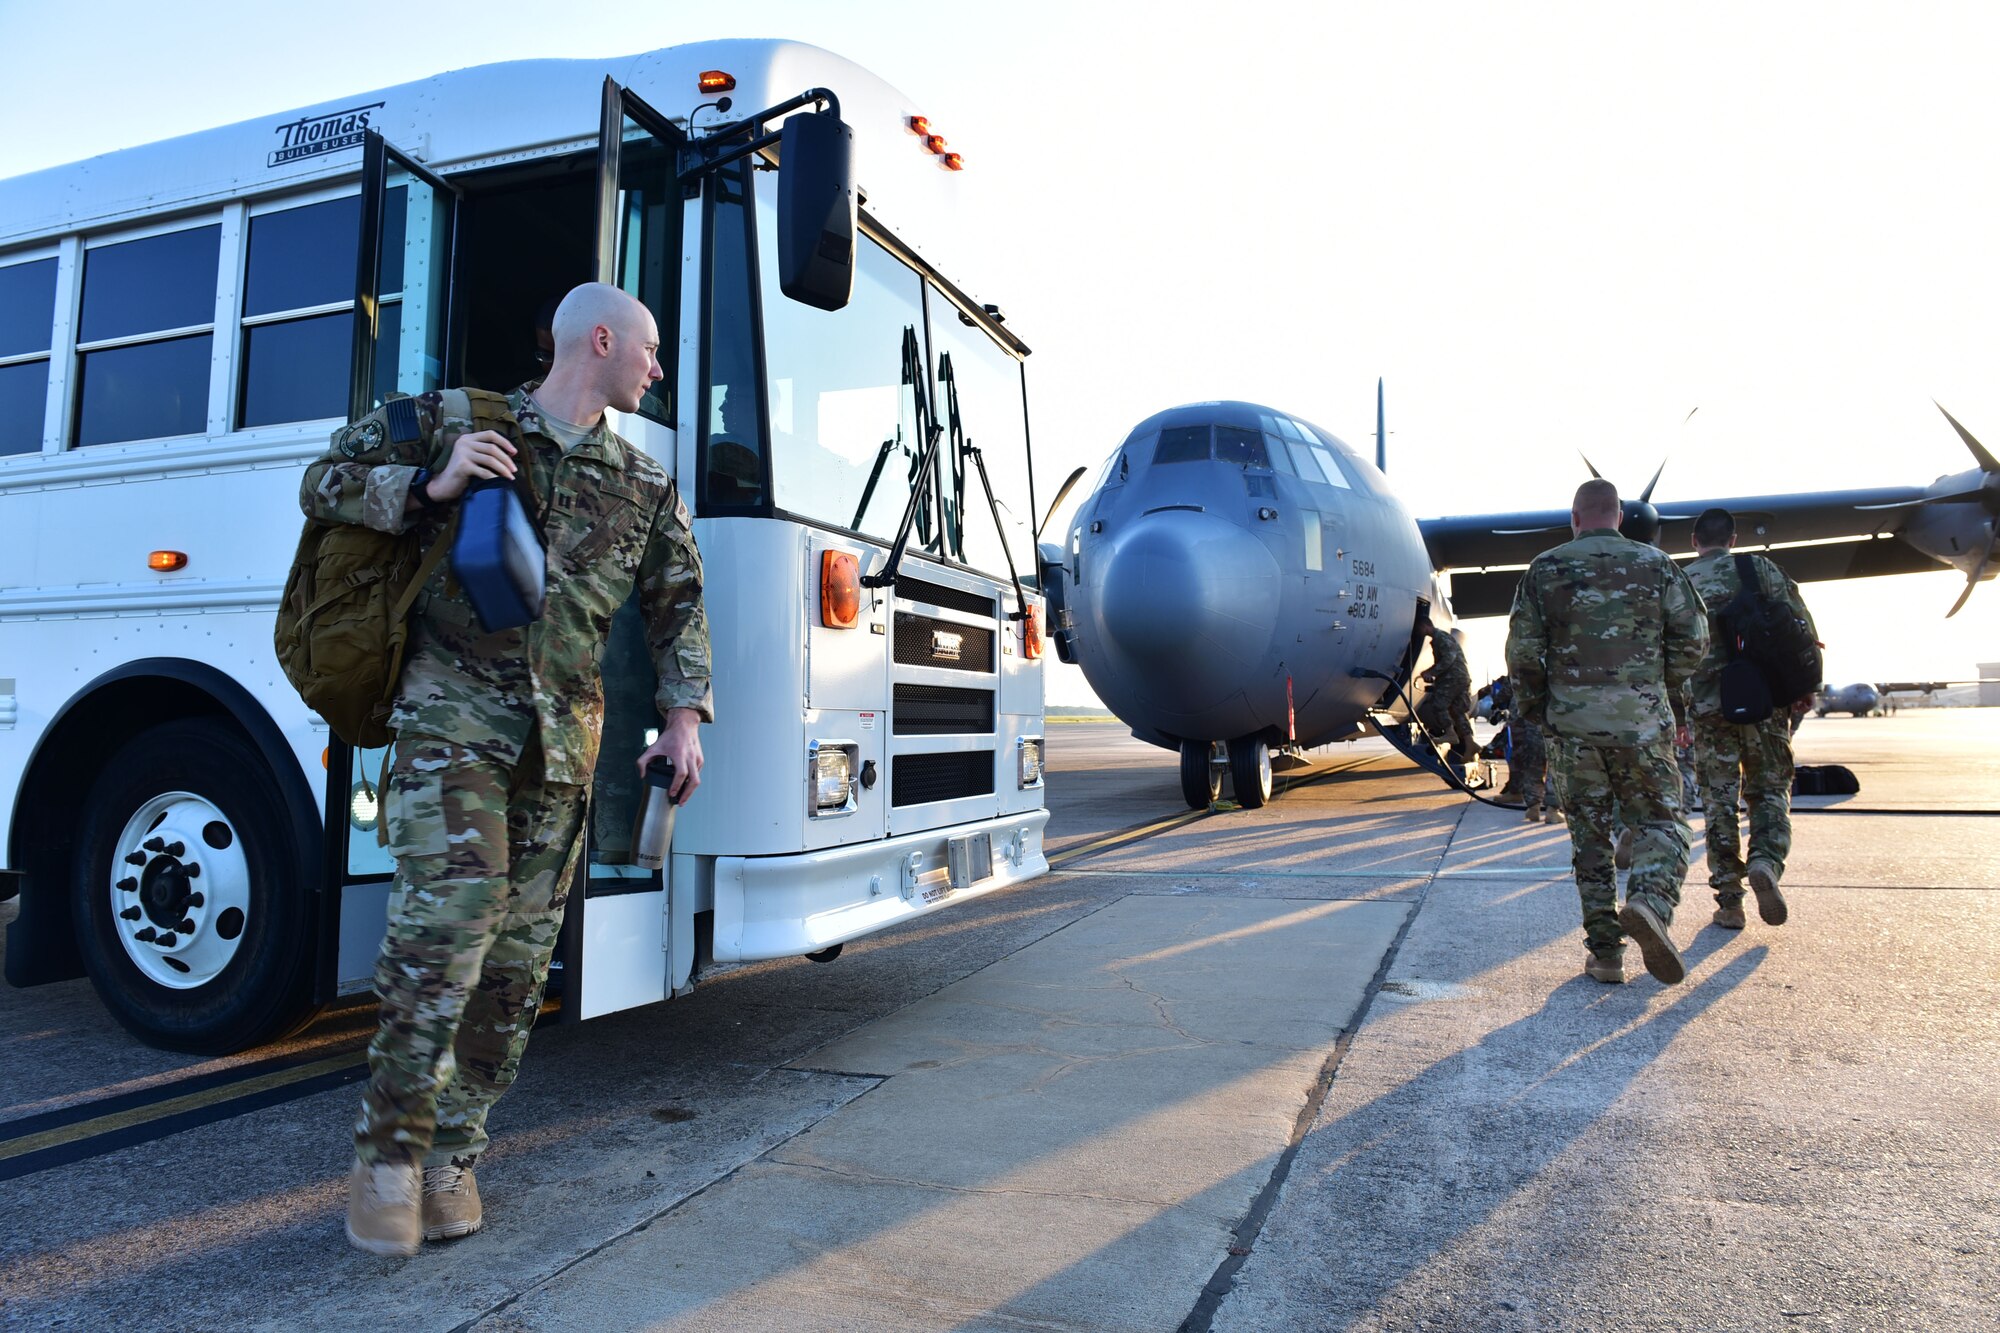 Capt. John Rebolledo, 61st Airlift Squadron pilot, leaves for deployment to Southeast Asia at Little Rock Air Force Base, Ark. Robelledo will be in charge of conducting mission support and transporting essential supplies and personnel upon his arrival. (U.S. Air Force photo by Airman Rhett Isbell)